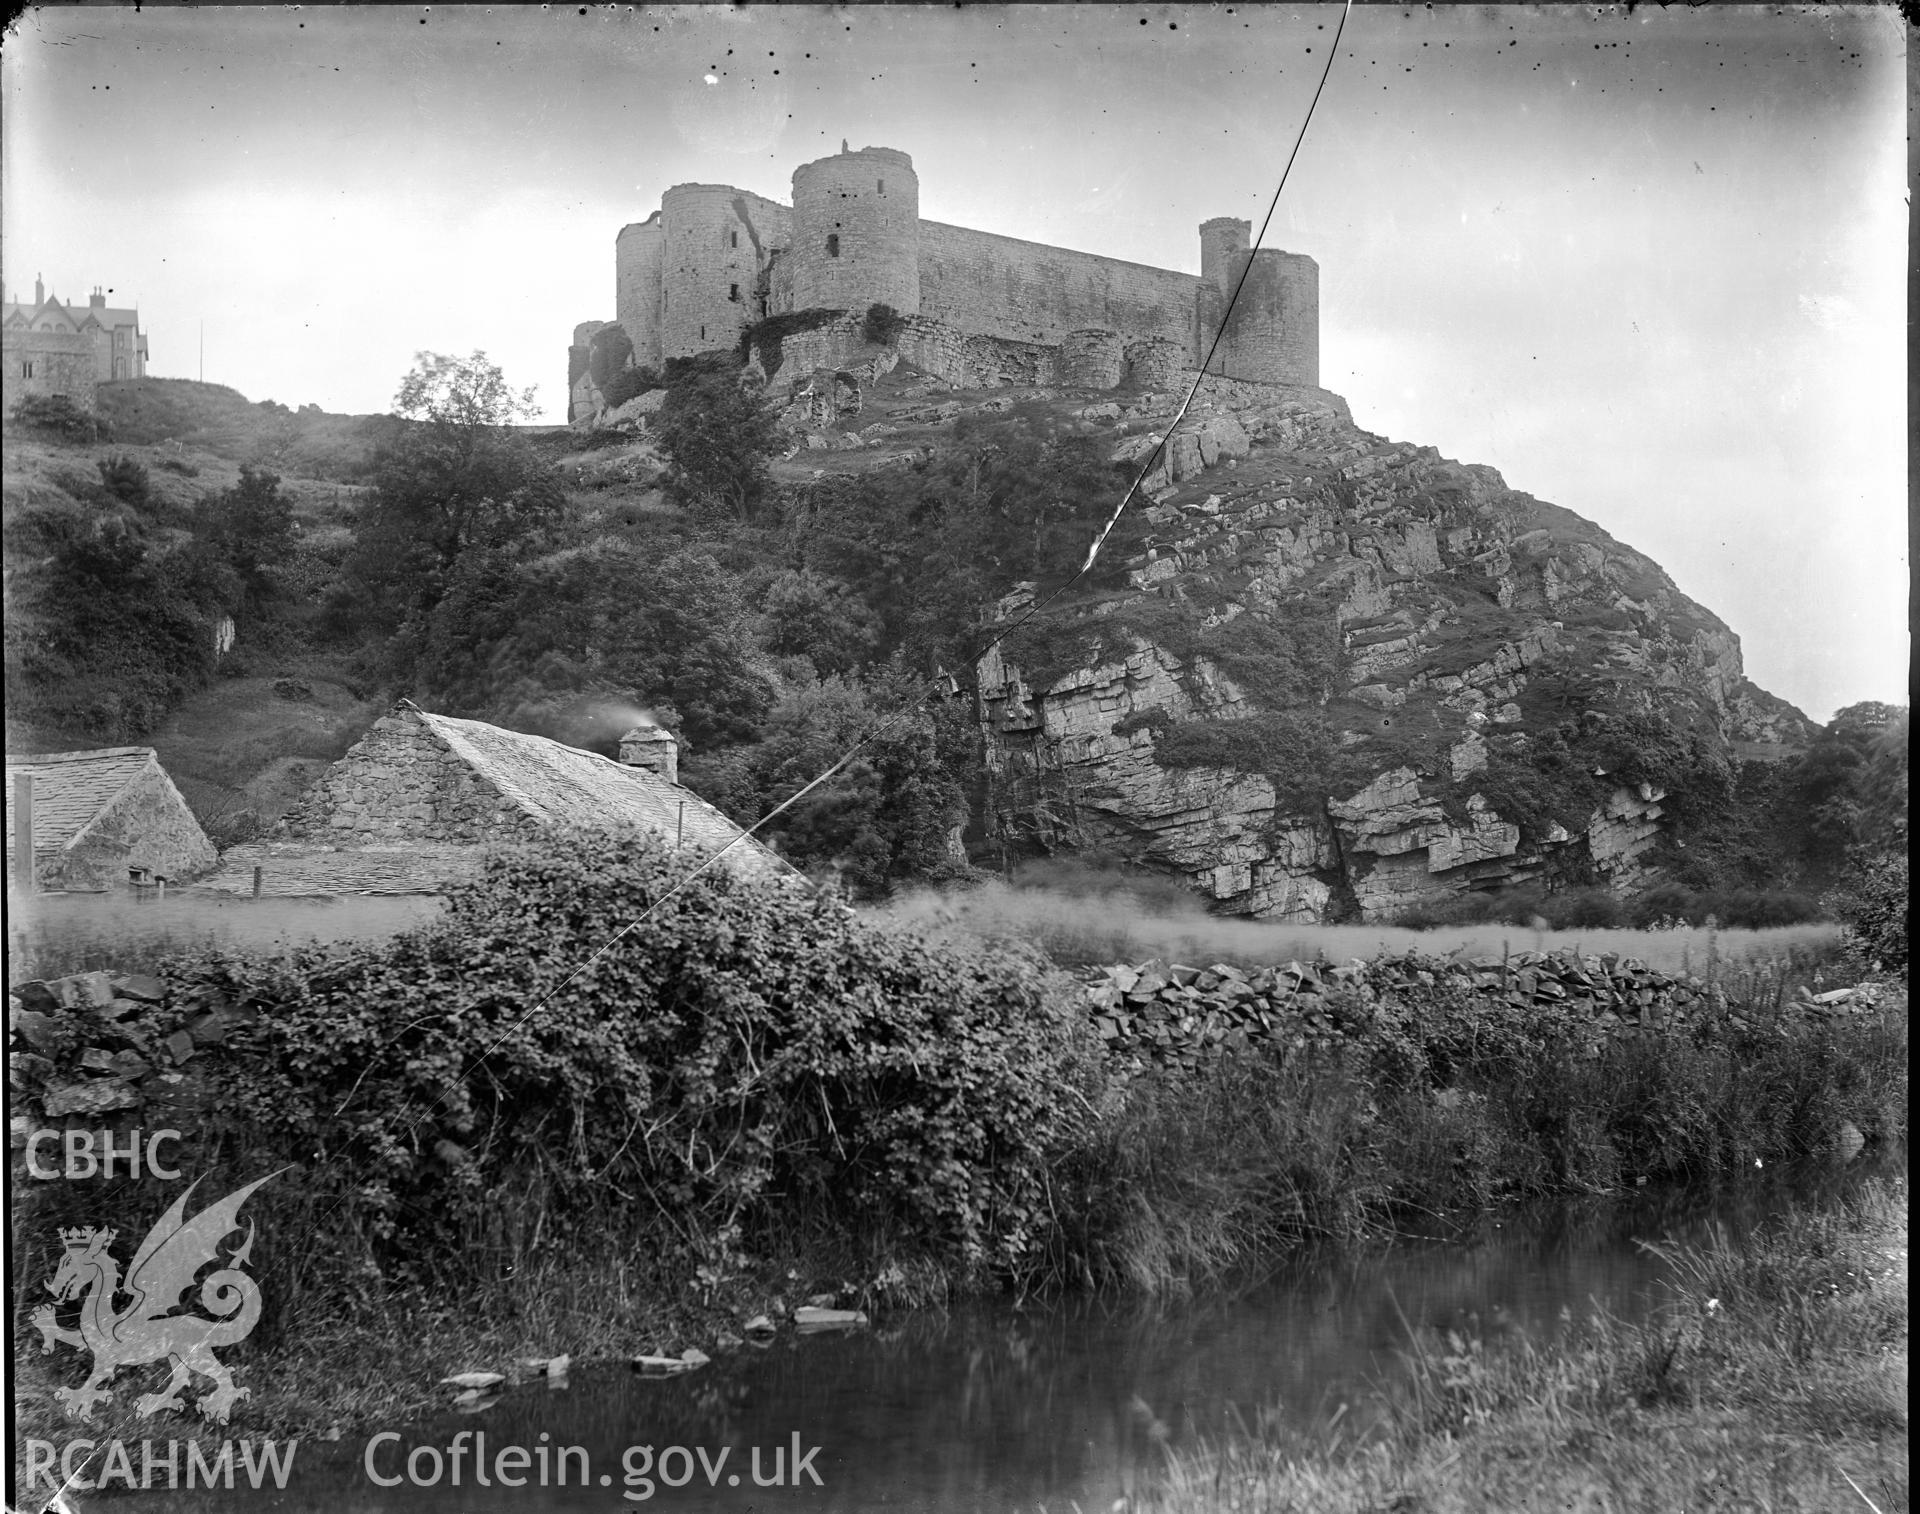 Back and white print showing Harlech Castle.